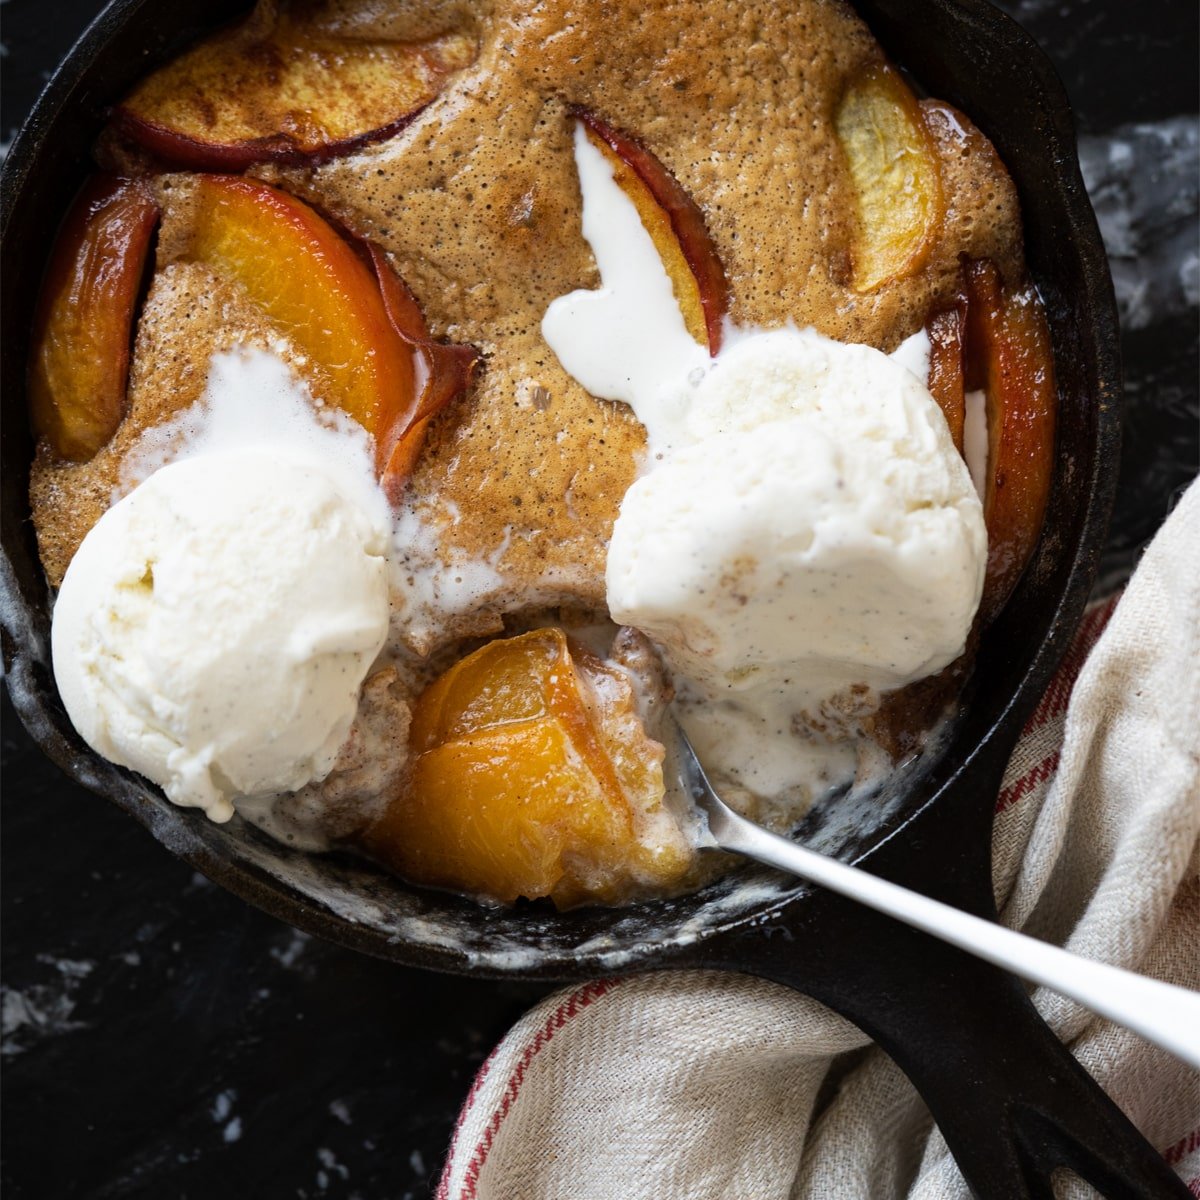 Keto peach cobbler with a flourless cake like topping and vanilla ice cream